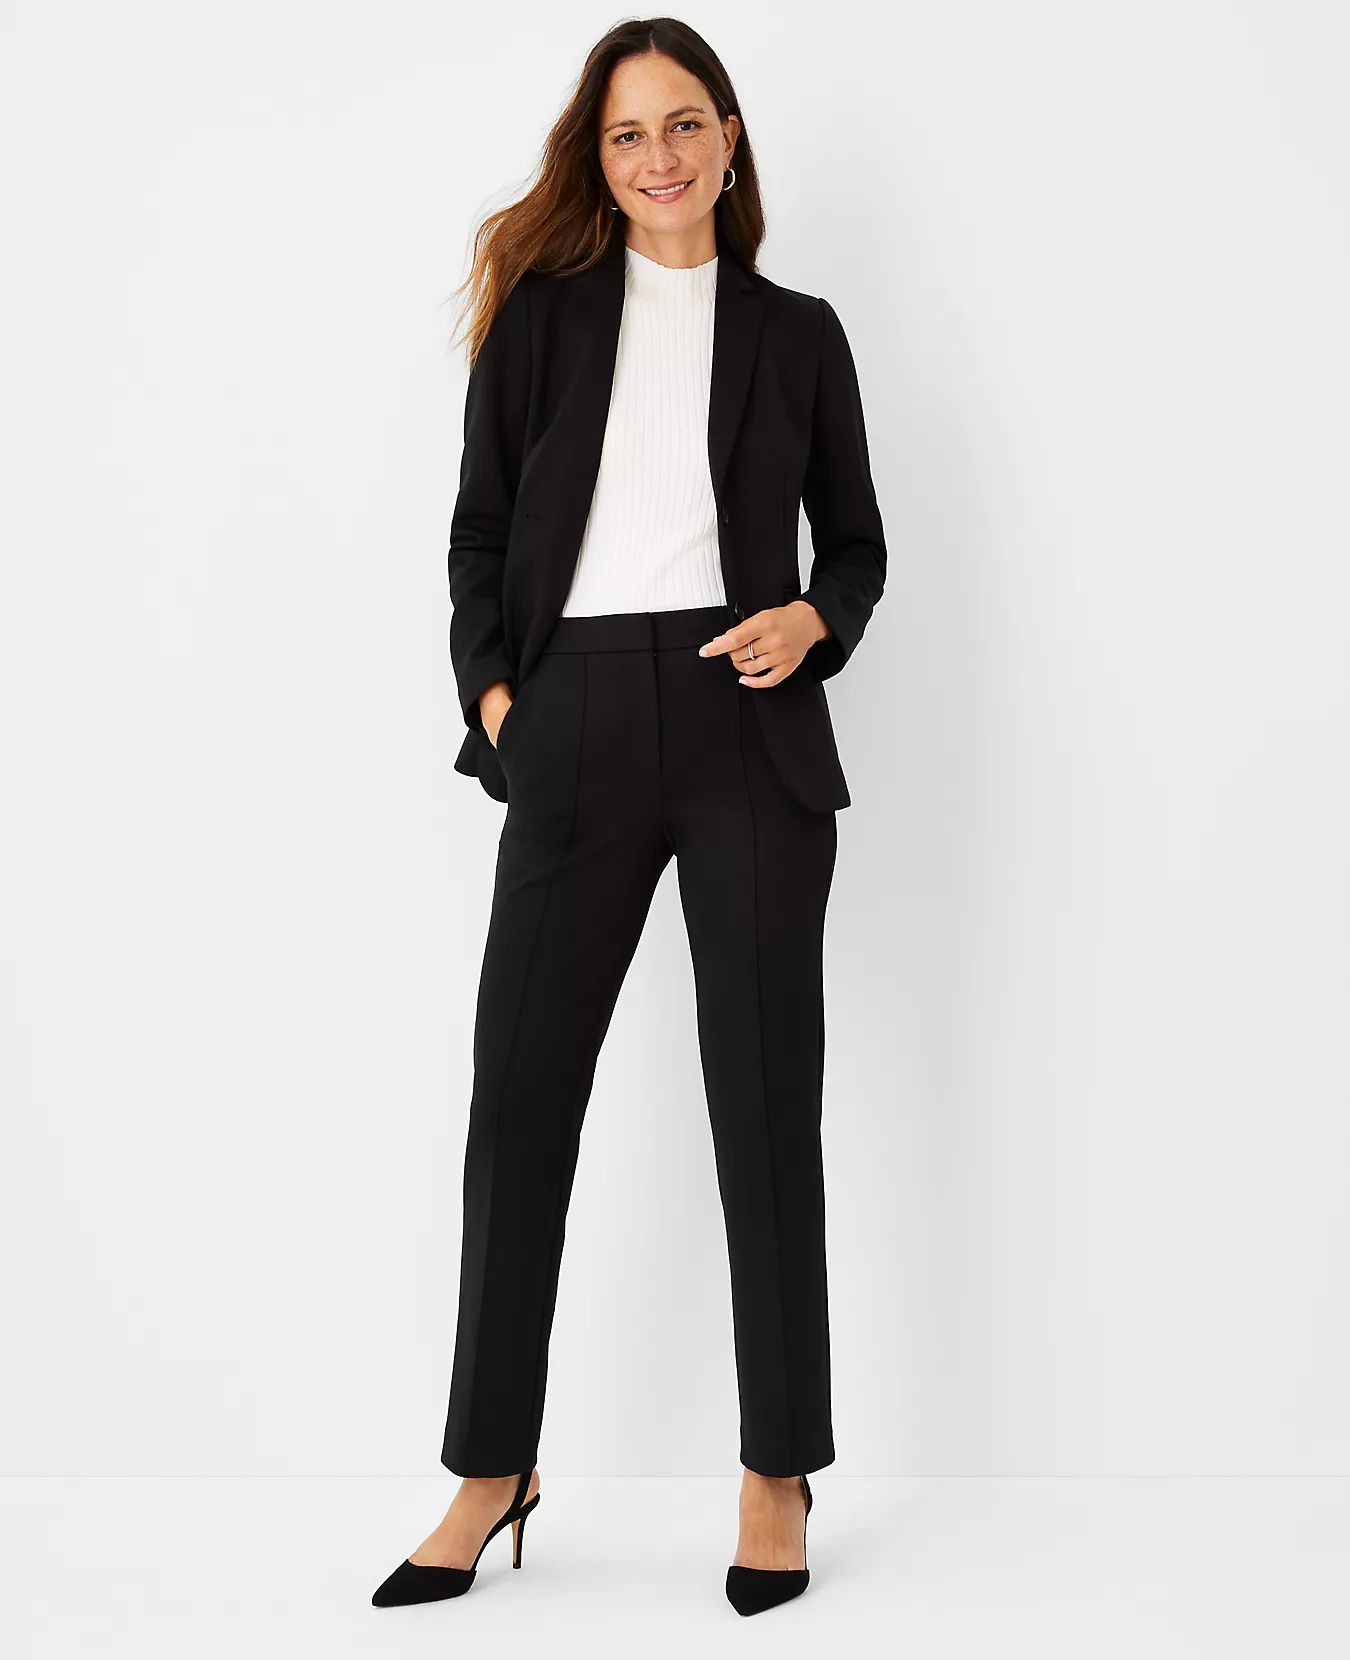 The High Rise Pintucked Straight Leg Pant in Double Knit | Ann Taylor (US)